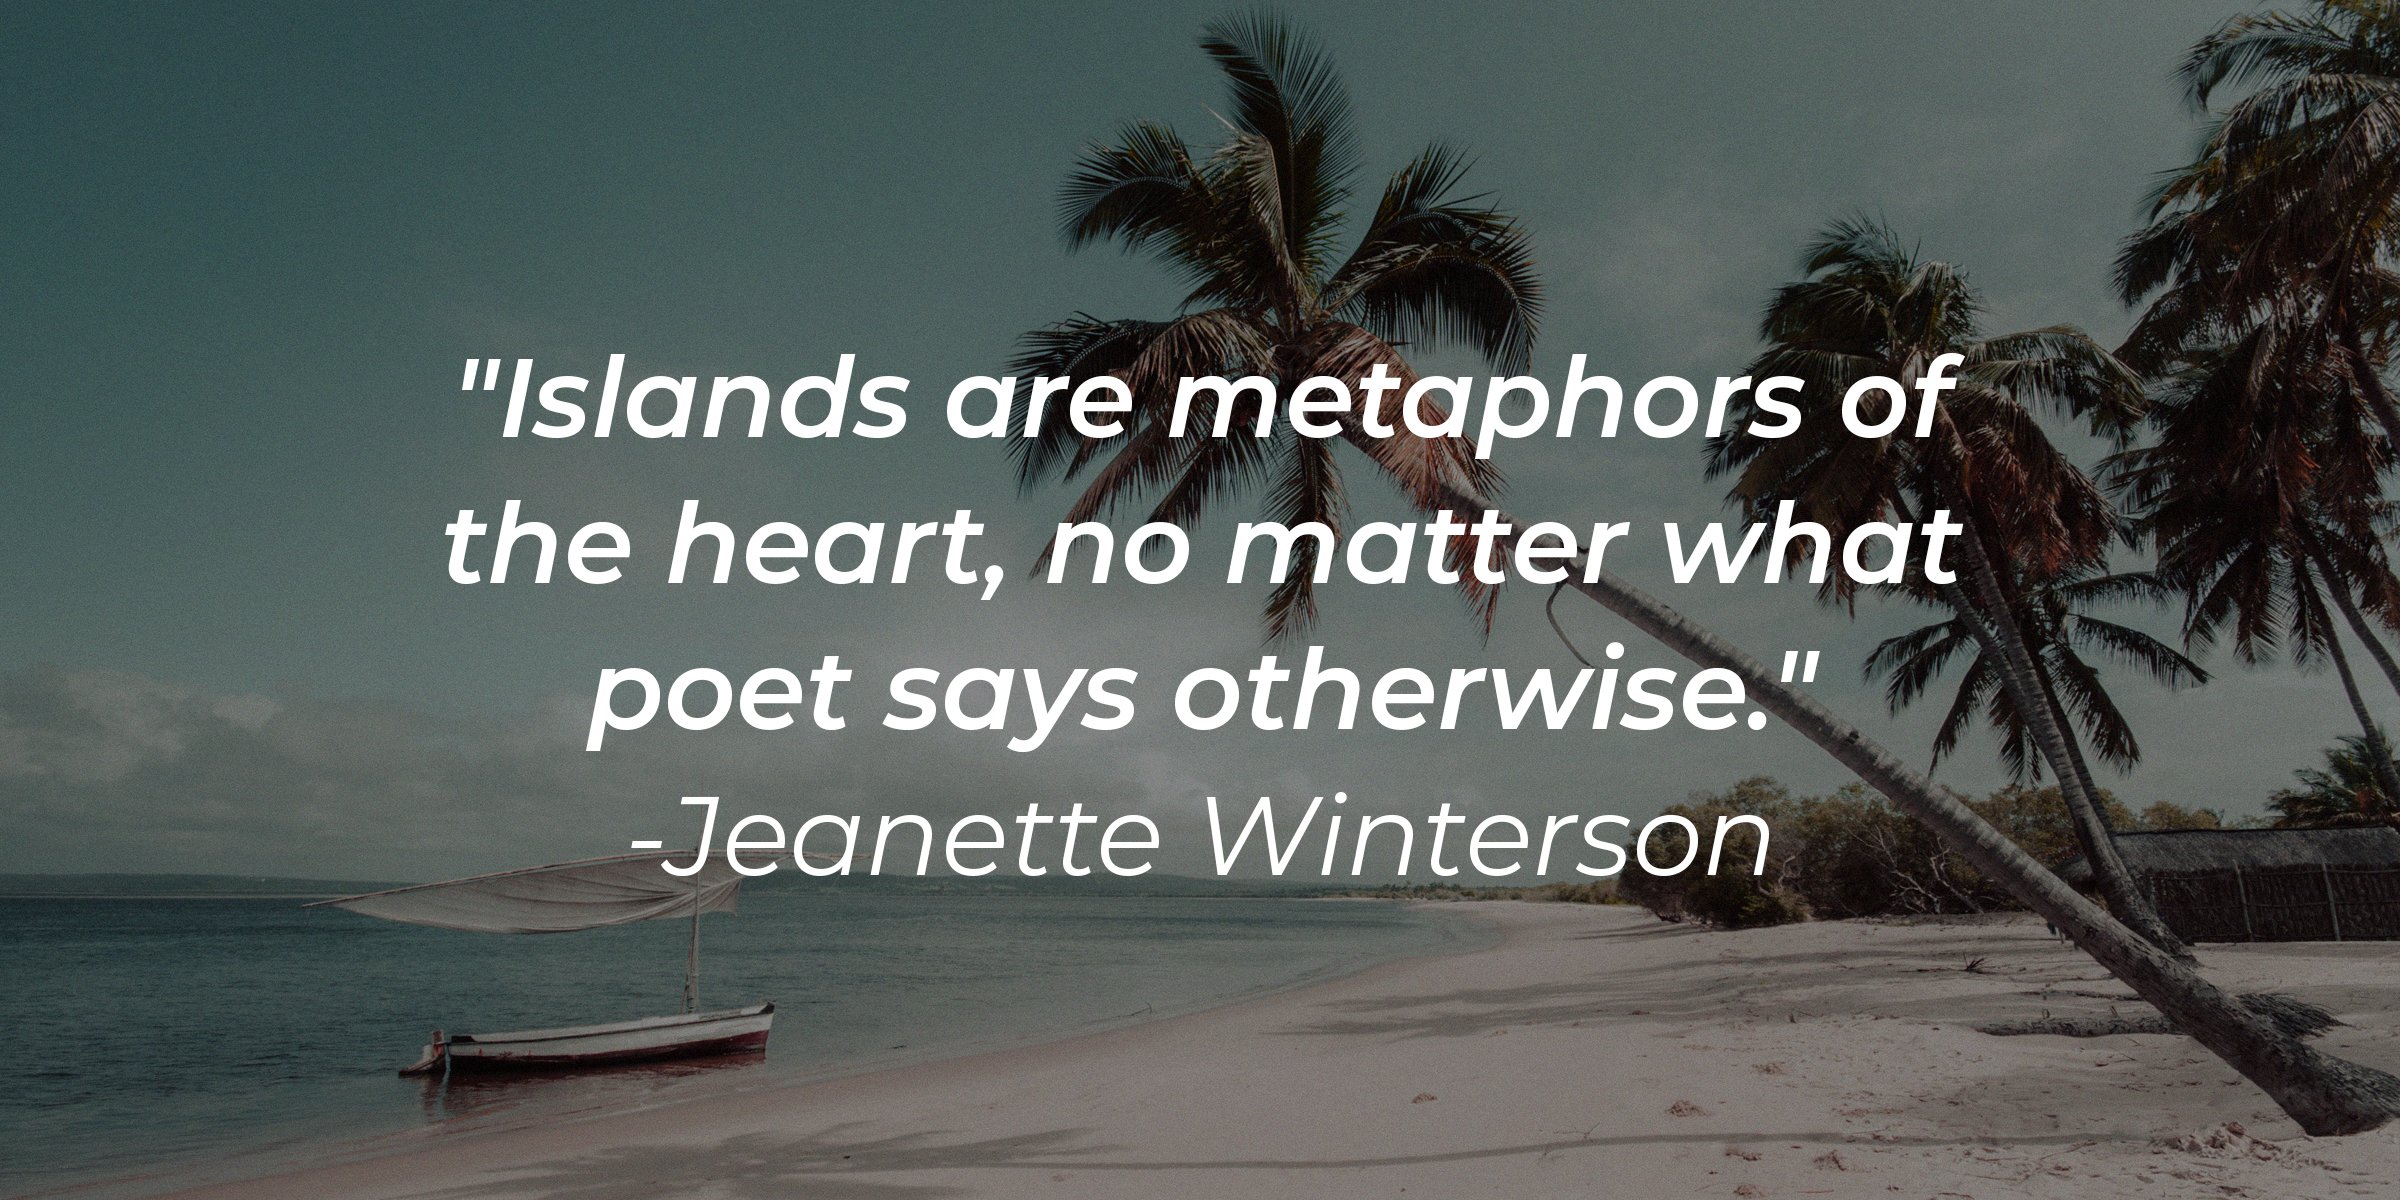 Source: Unsplash | A picturesque island with the quote, "Islands are metaphors of the heart, no matter what poet says otherwise," by Jeanette Winterson